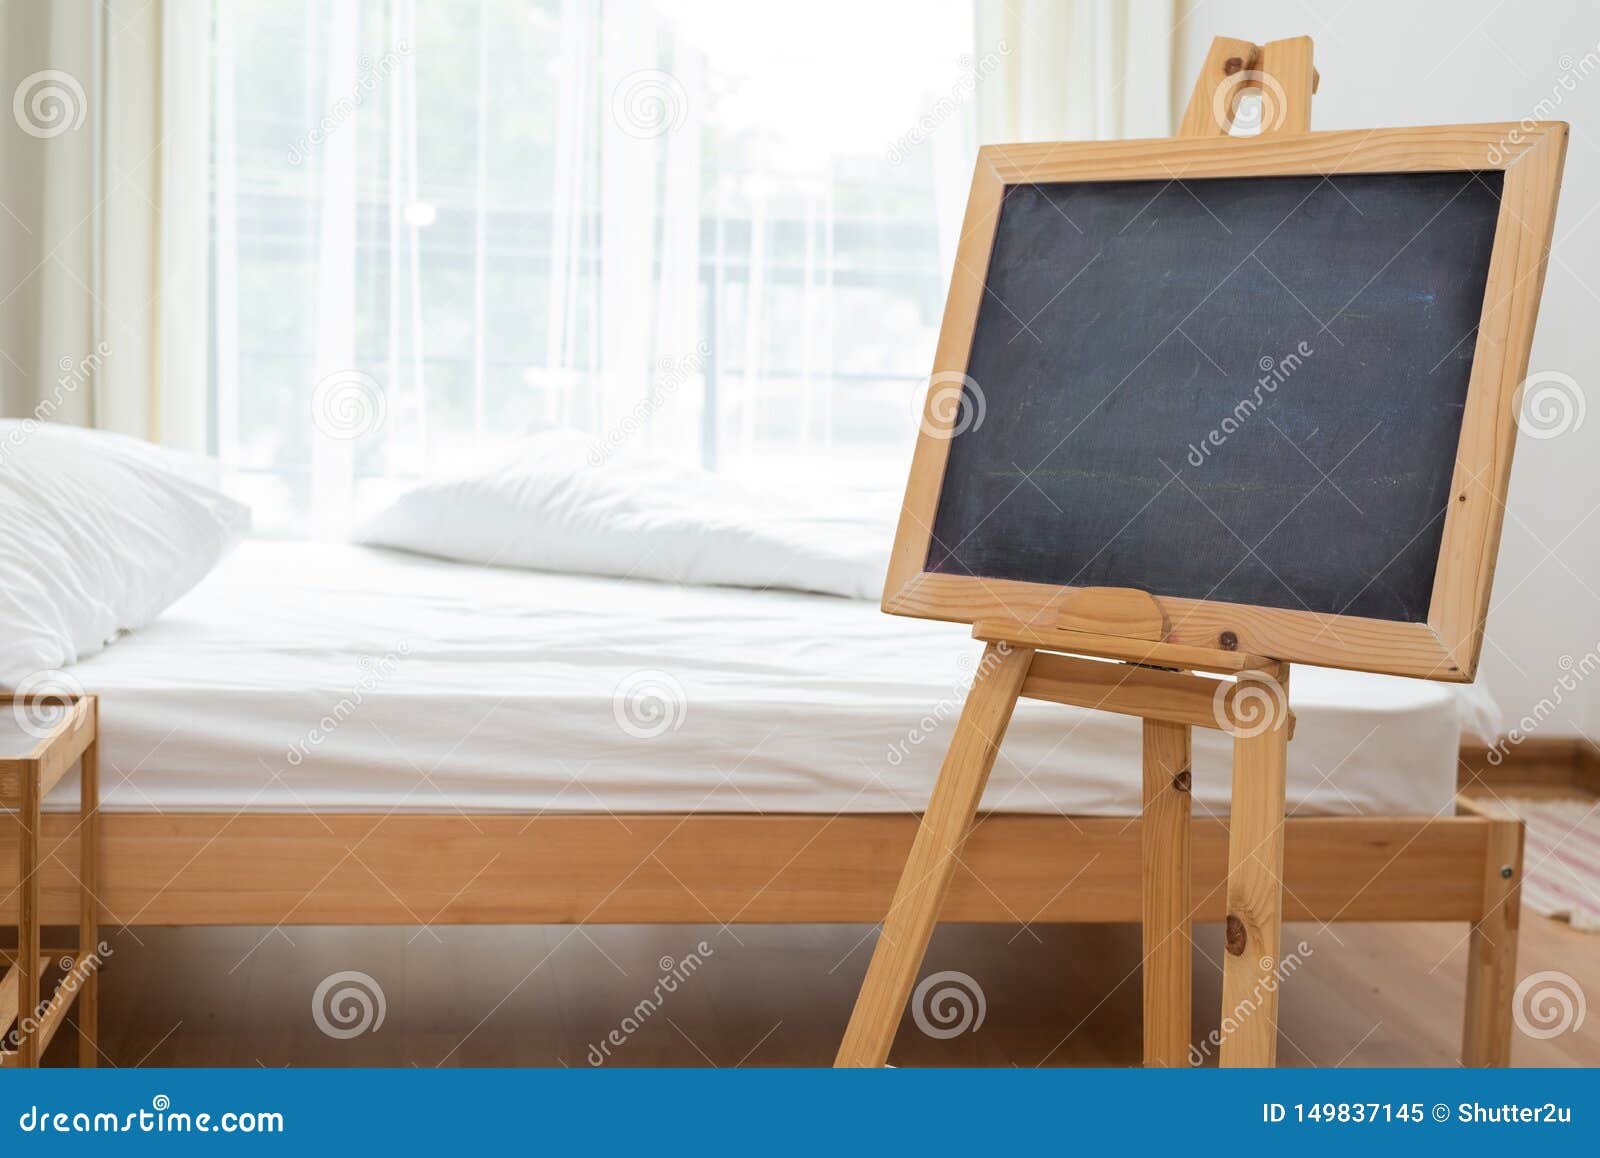 Black Chalkboard On Easel Stand In Bedroom With White Soft Bed